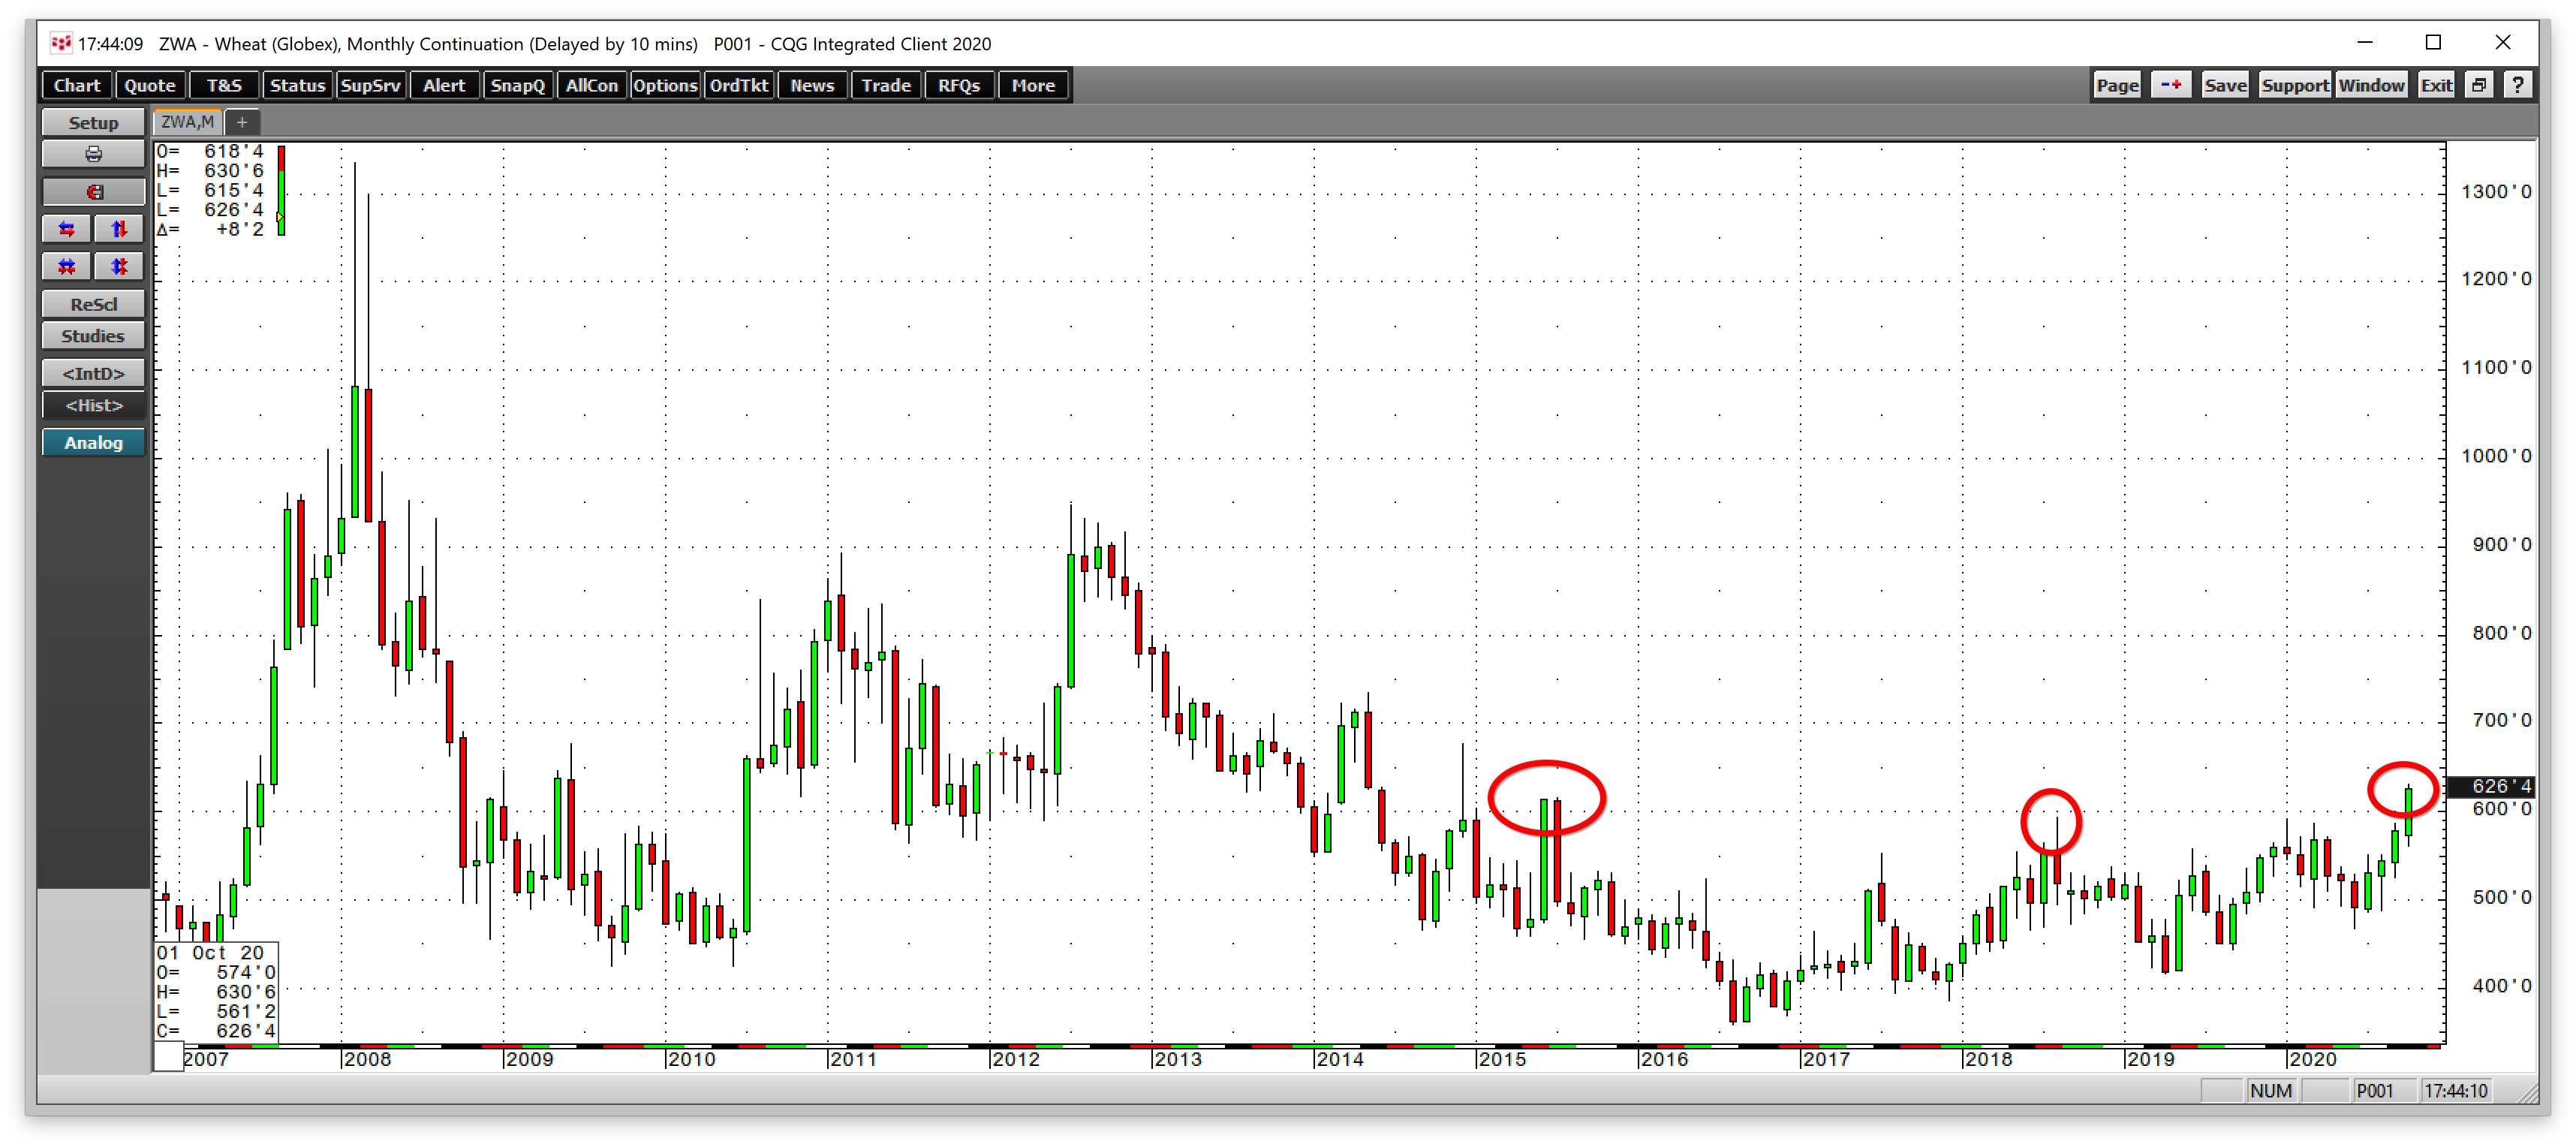 Wheat Futures Monthly Chart